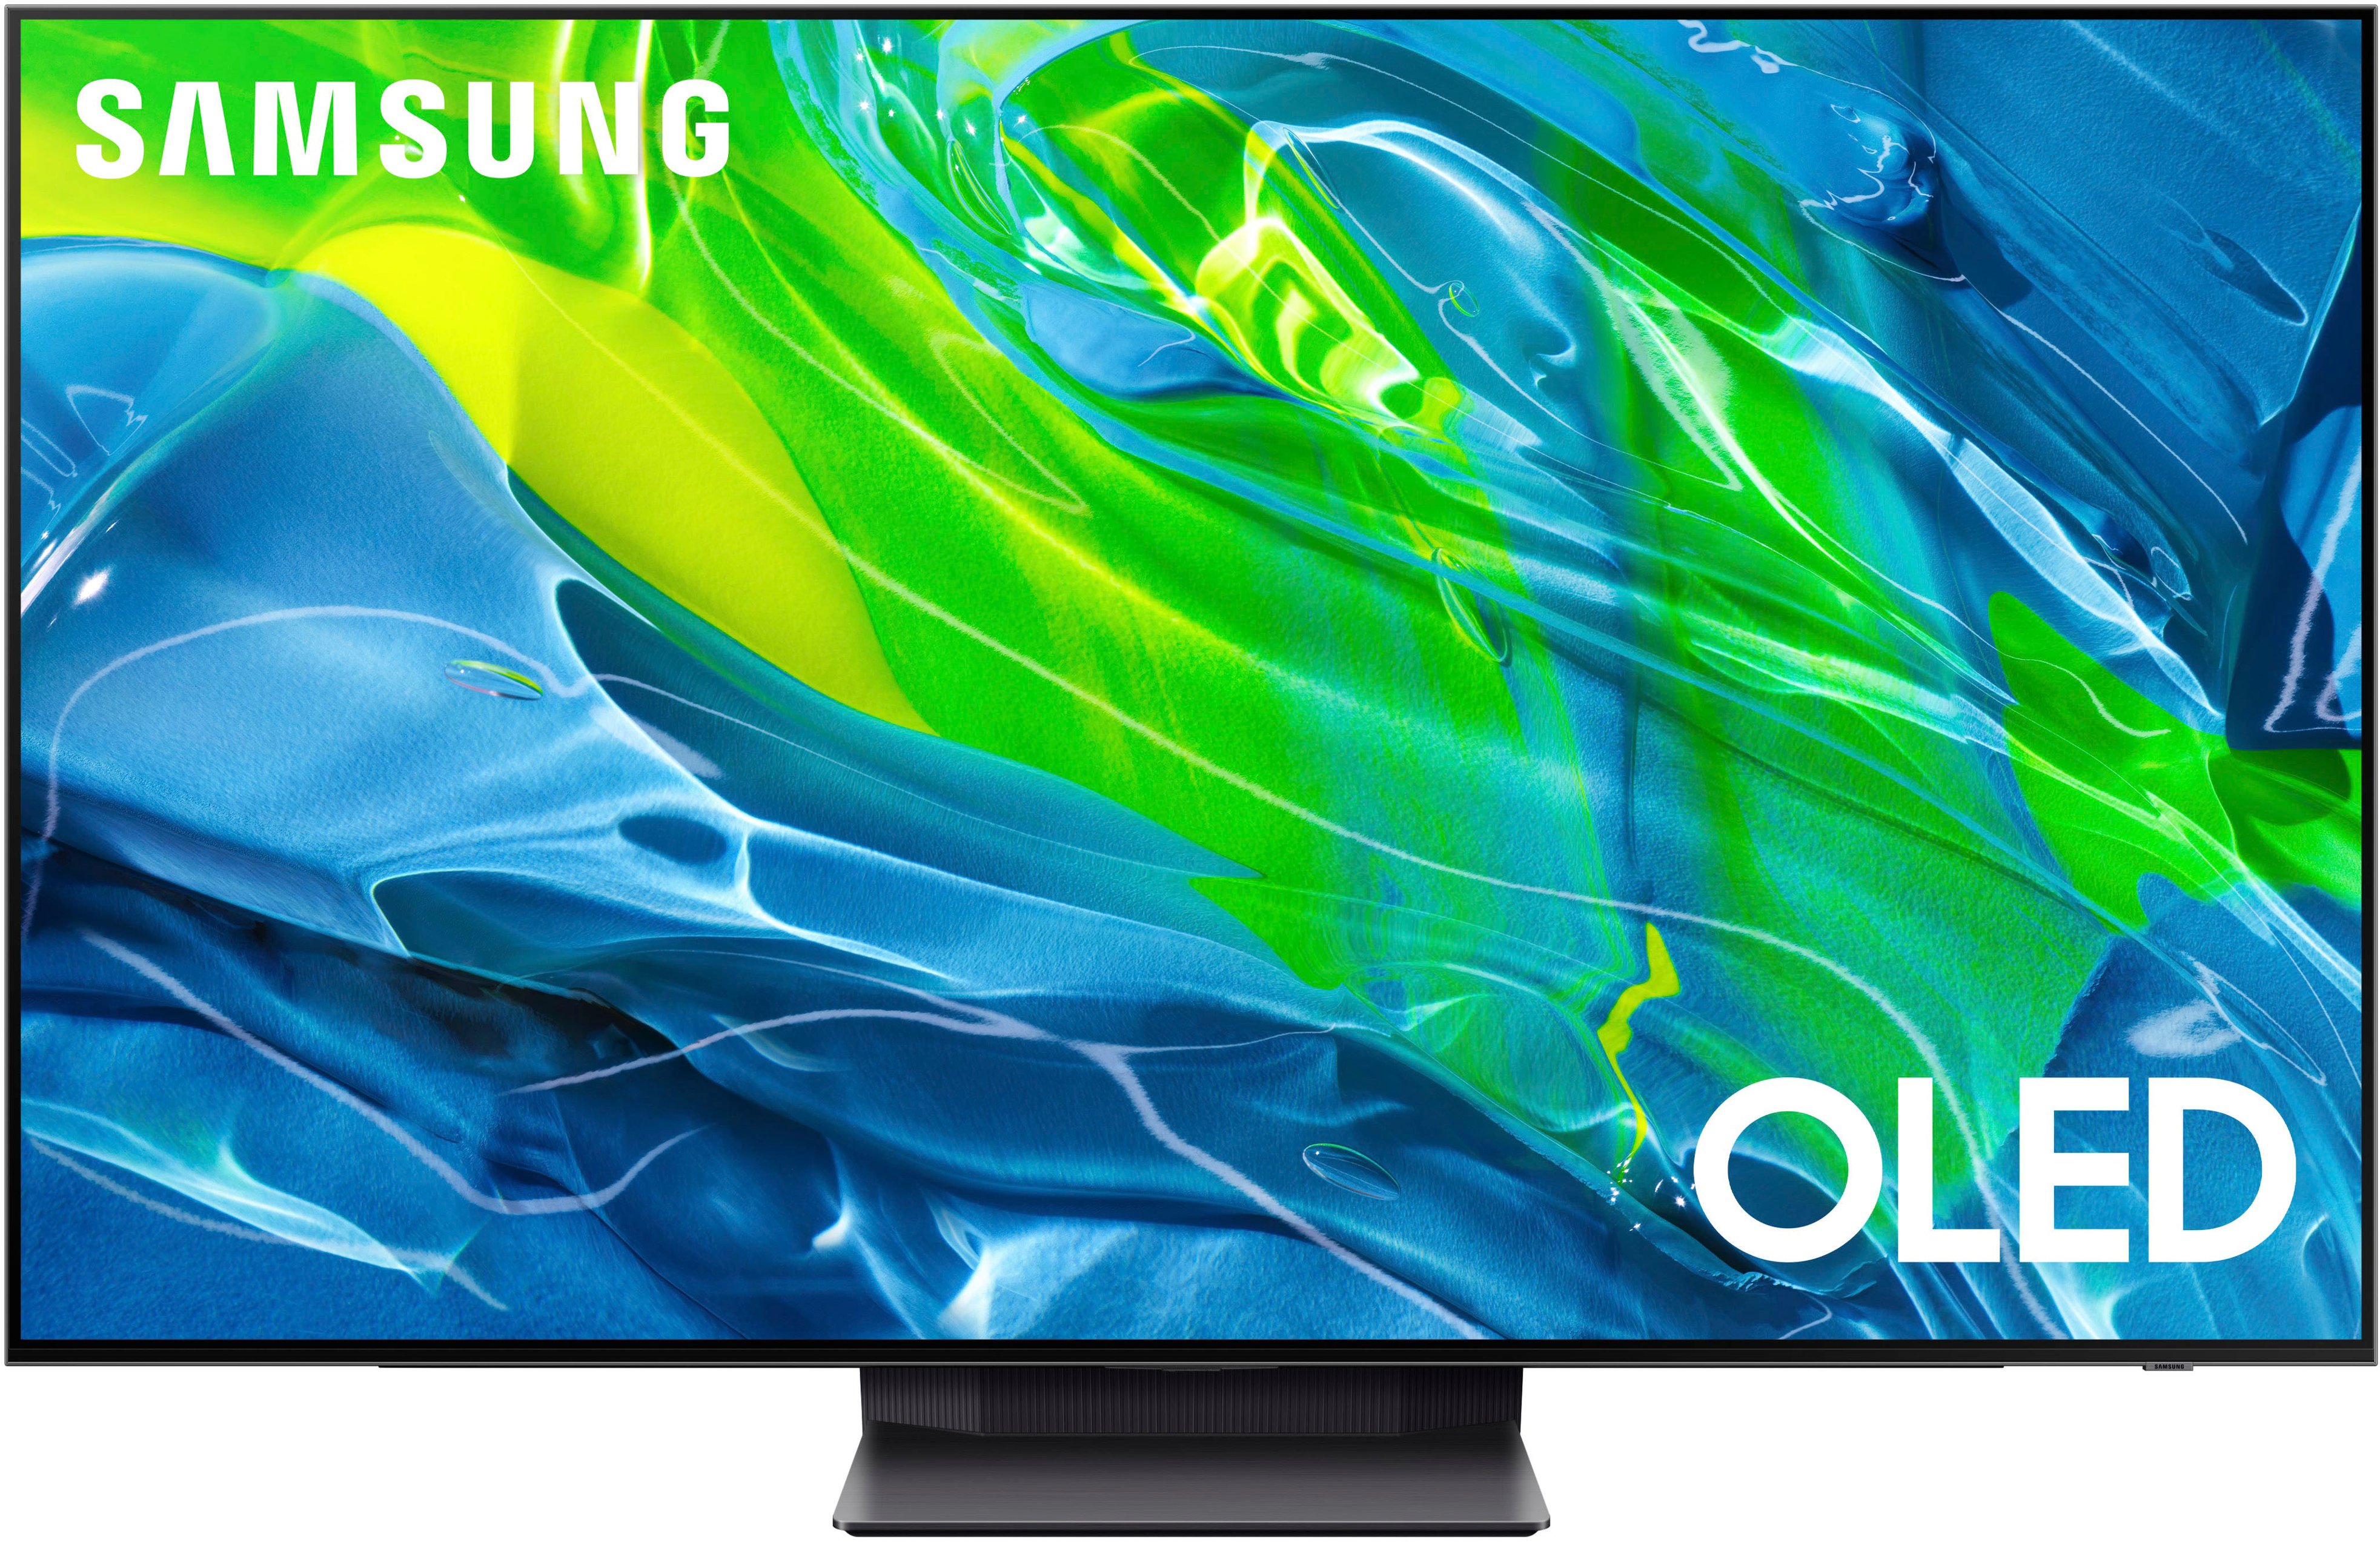 Samsung - 55” Class S95B OLED 4K Smart Tizen TV - Best Buy Open Box Outlet $876.79 (20% off all open box TV's at BB outlet stores)